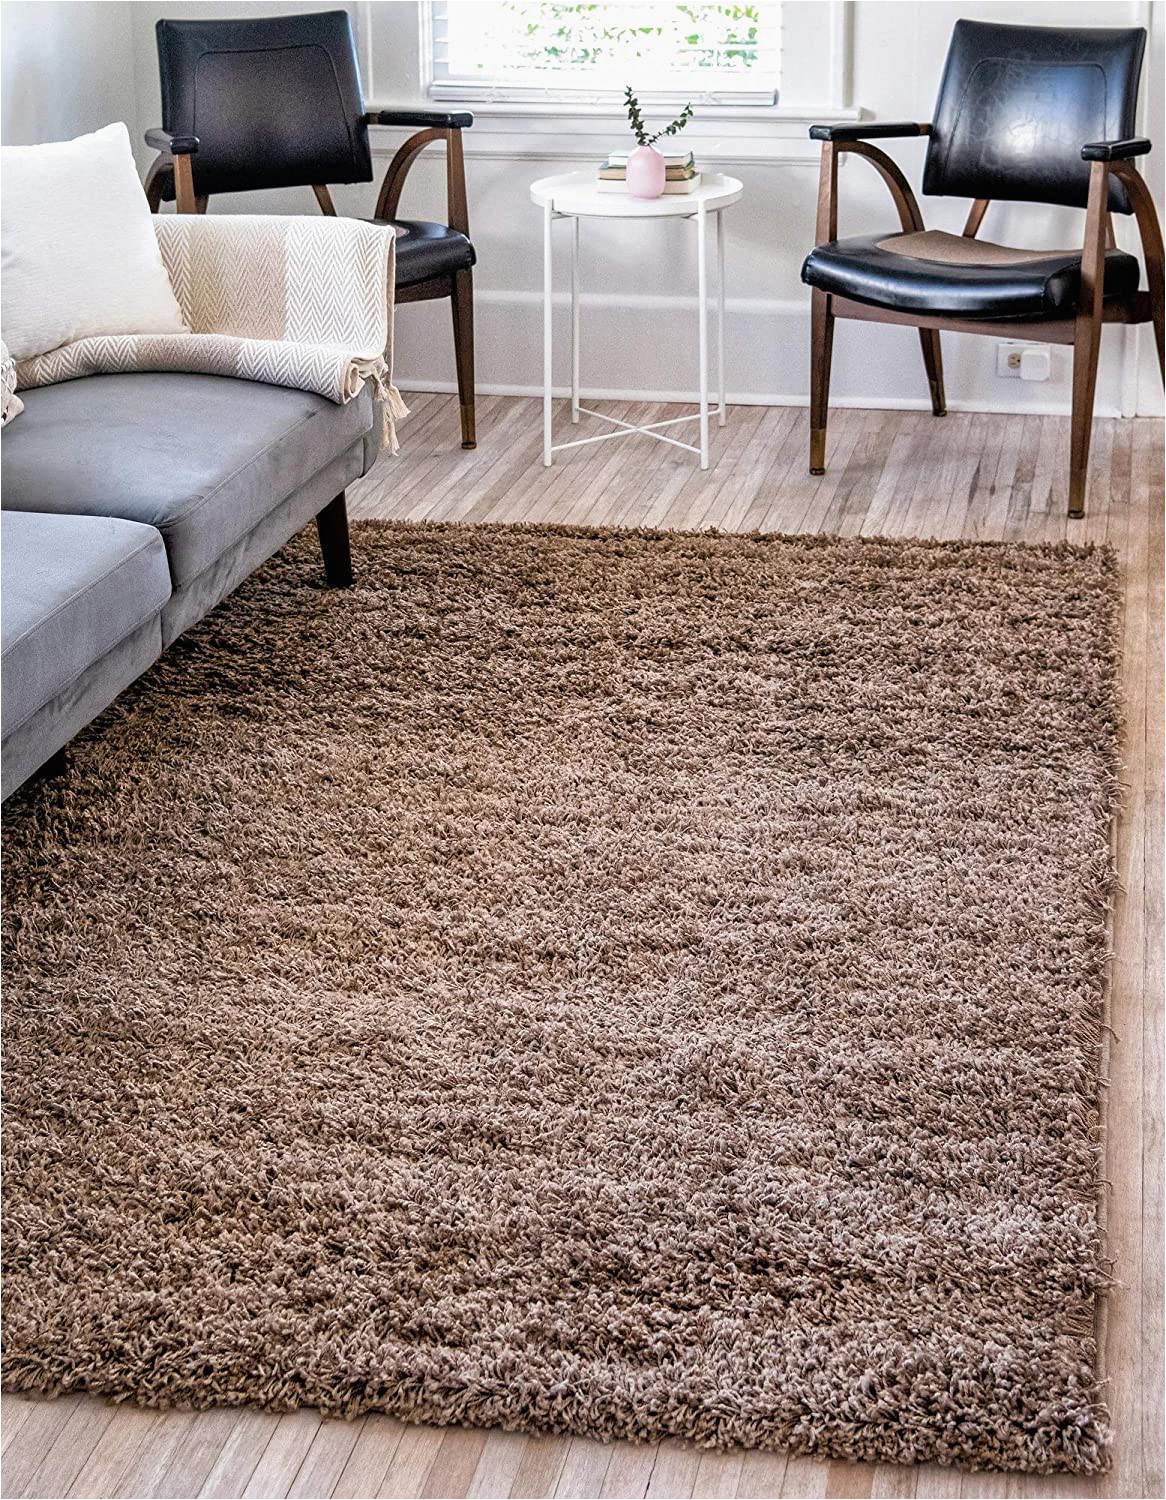 Safavieh California solid Plush Shag area Rug or Runner Unique Loom solo solid Shag Collection Modern Plush Sandy Brown area Rug 8 0 X 10 0